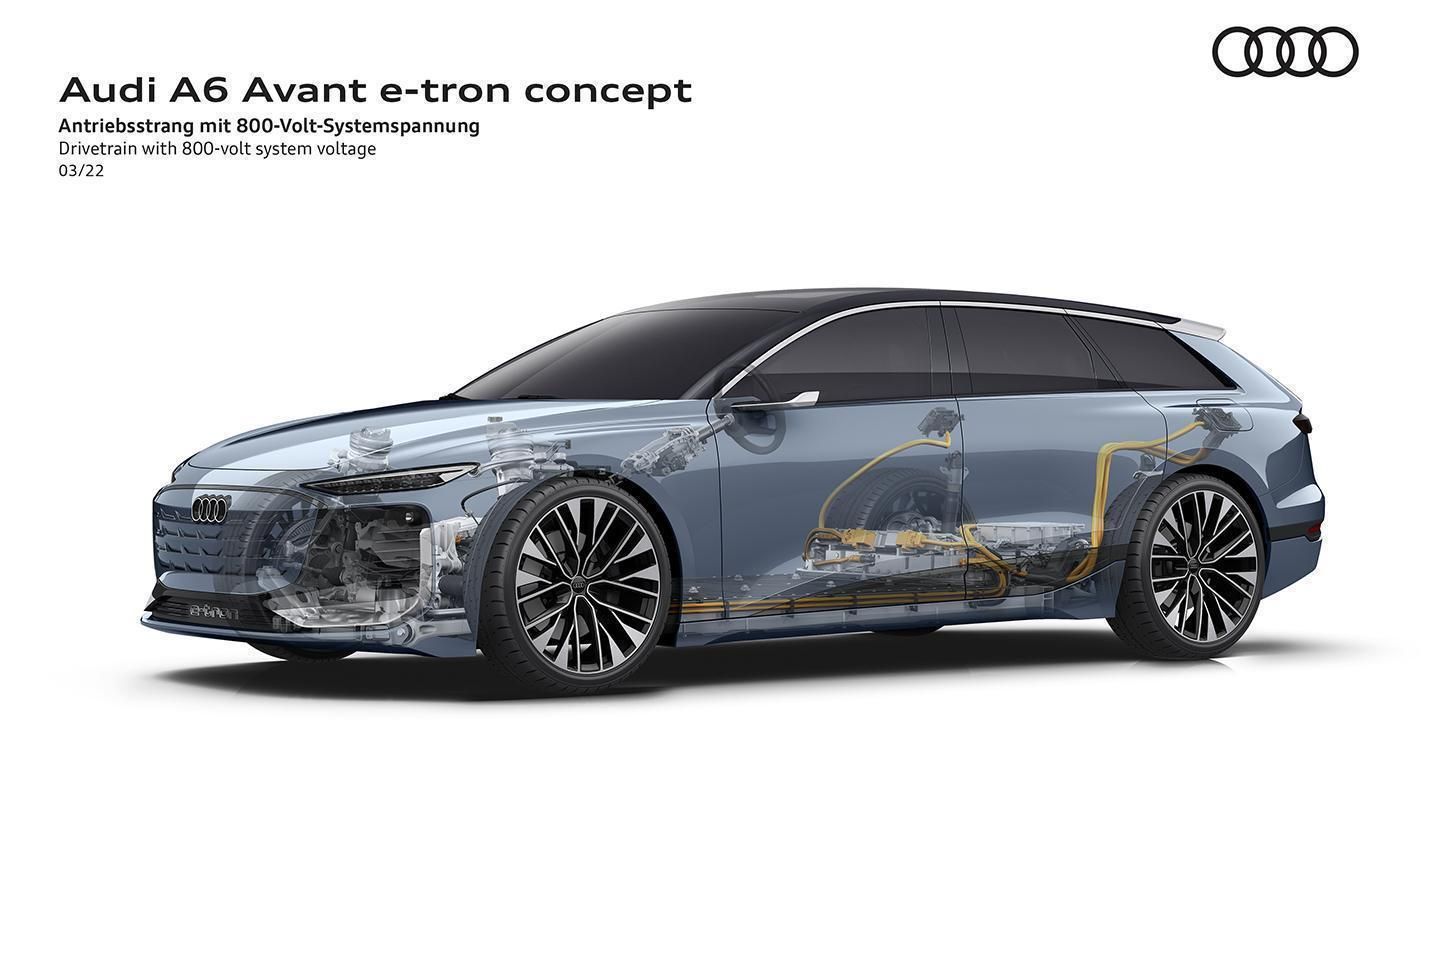 Audi A6 Avant E-Tron Concept Proves Wagons Have a Place in the Future - CNET